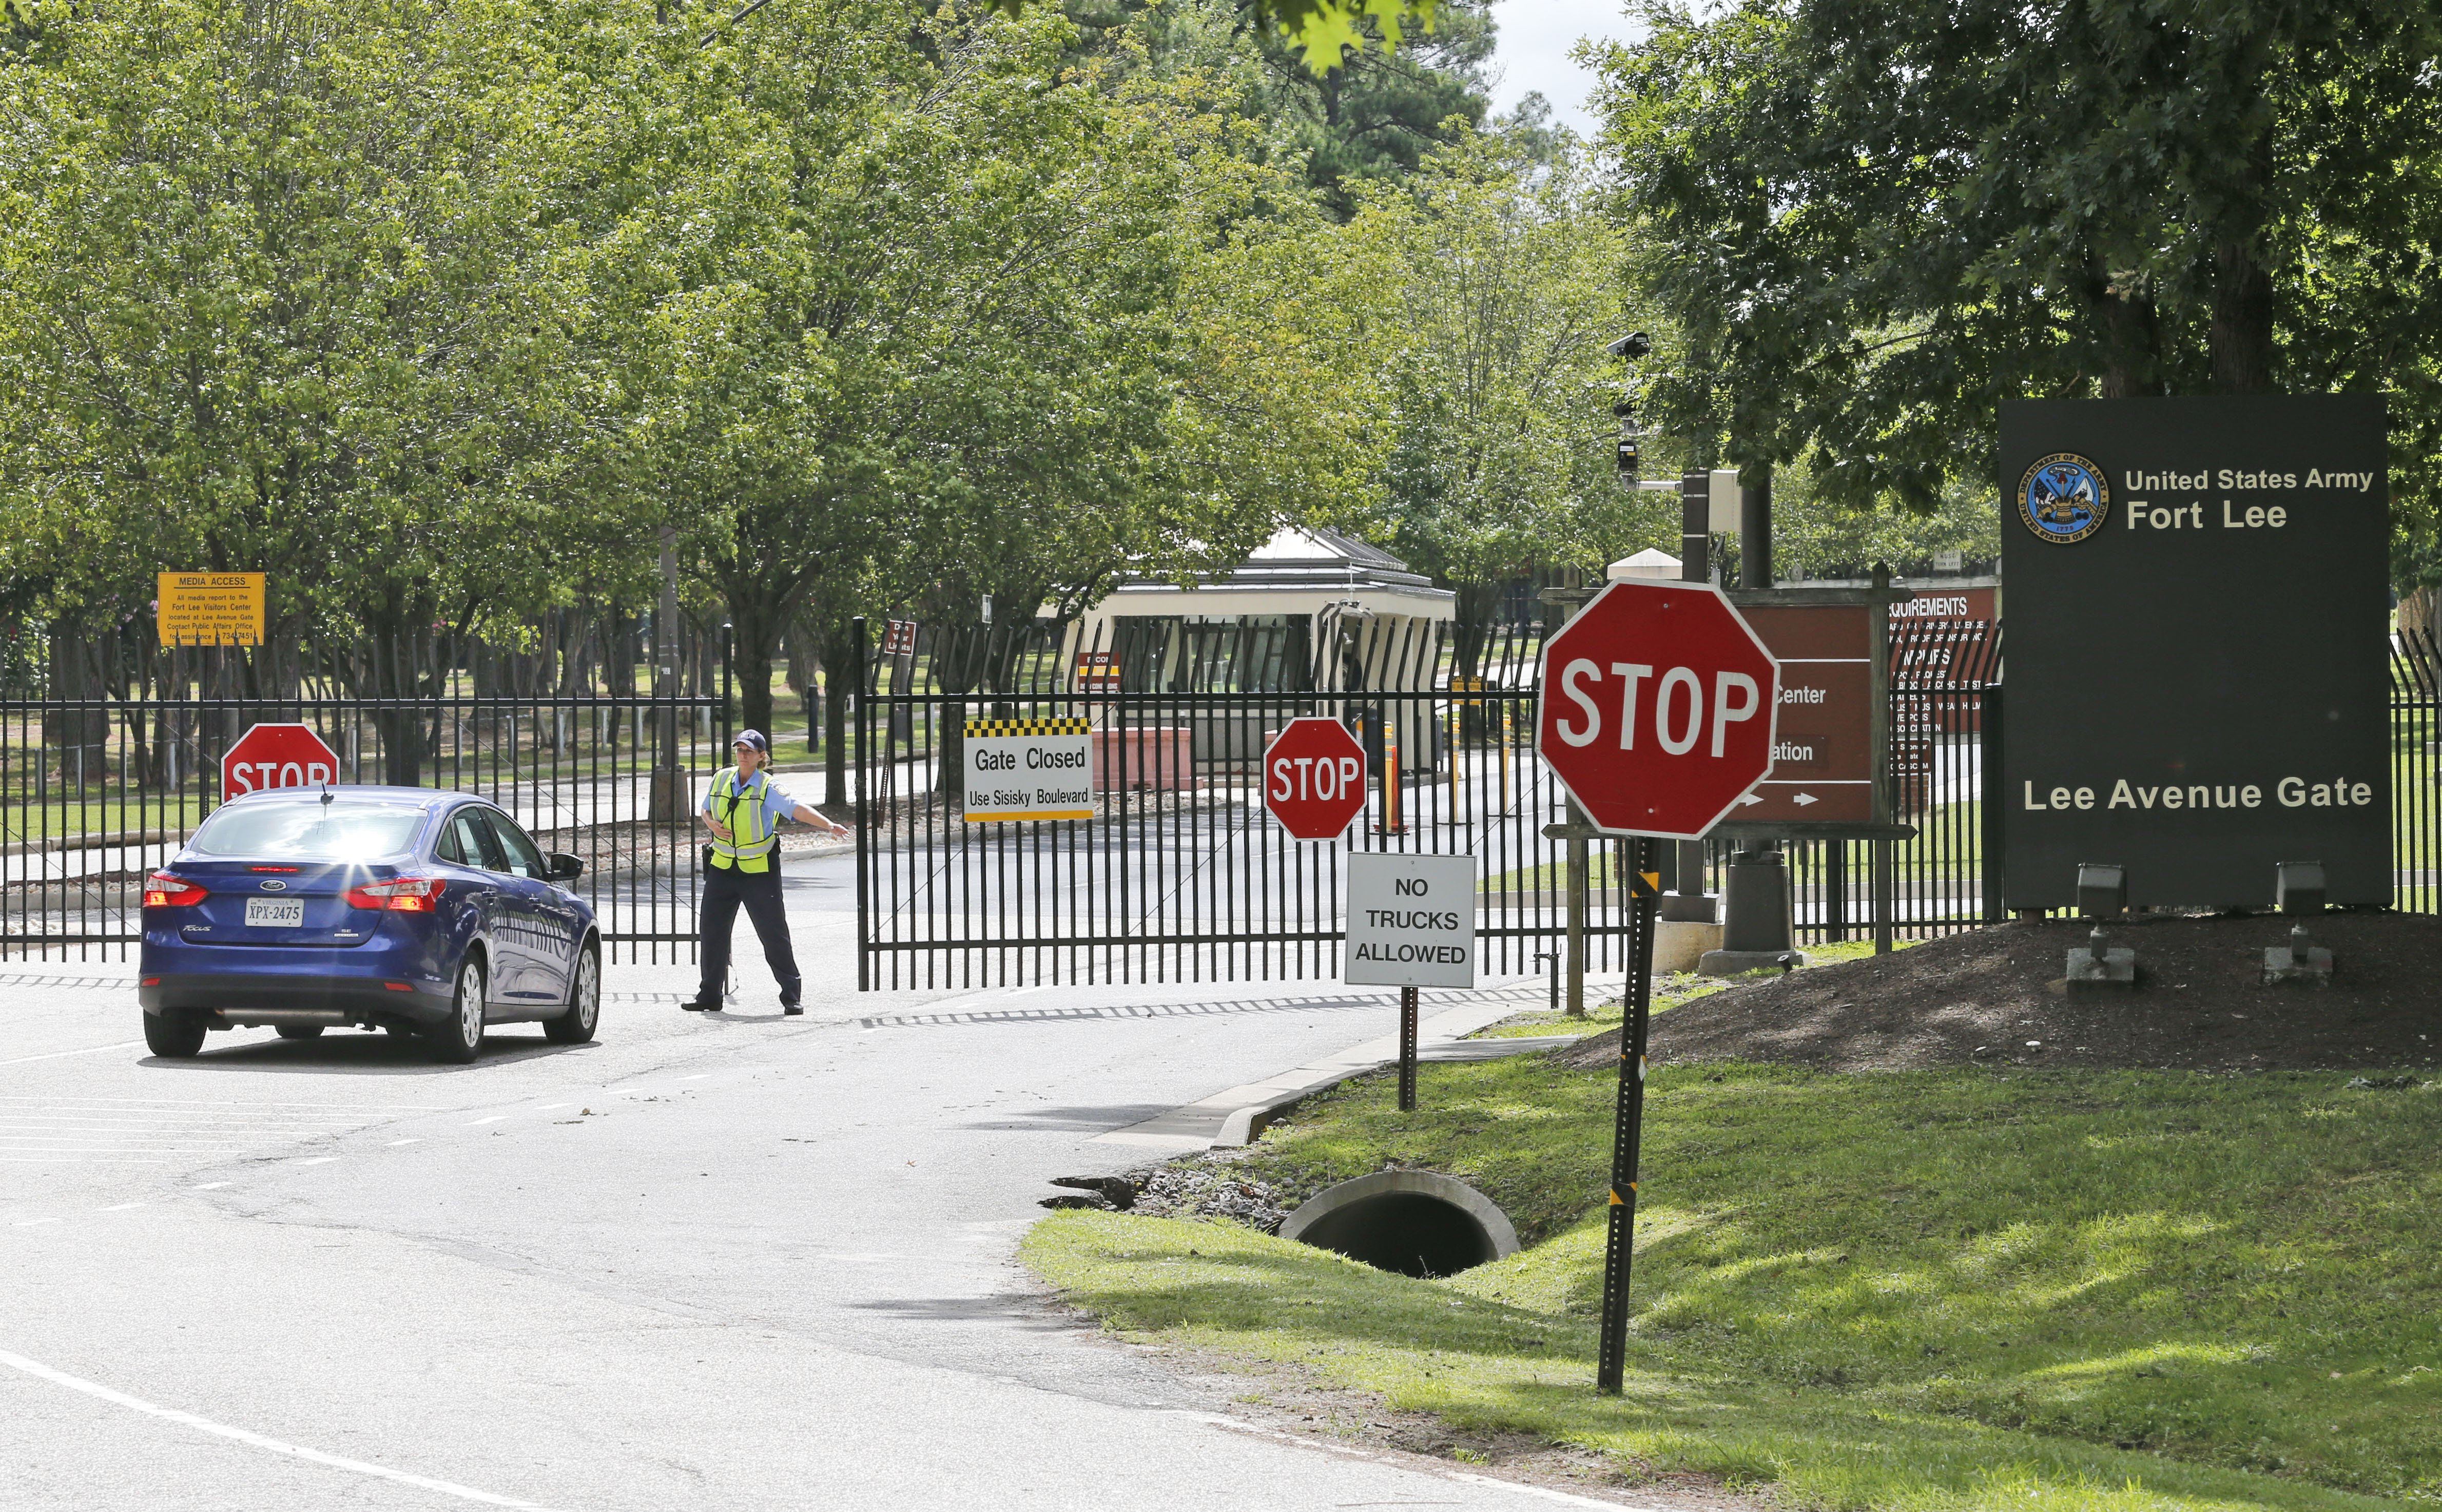 Security guards open a gate for motorist at the visitor entrance to Fort Lee, Va. on Aug. 25, 2014.  